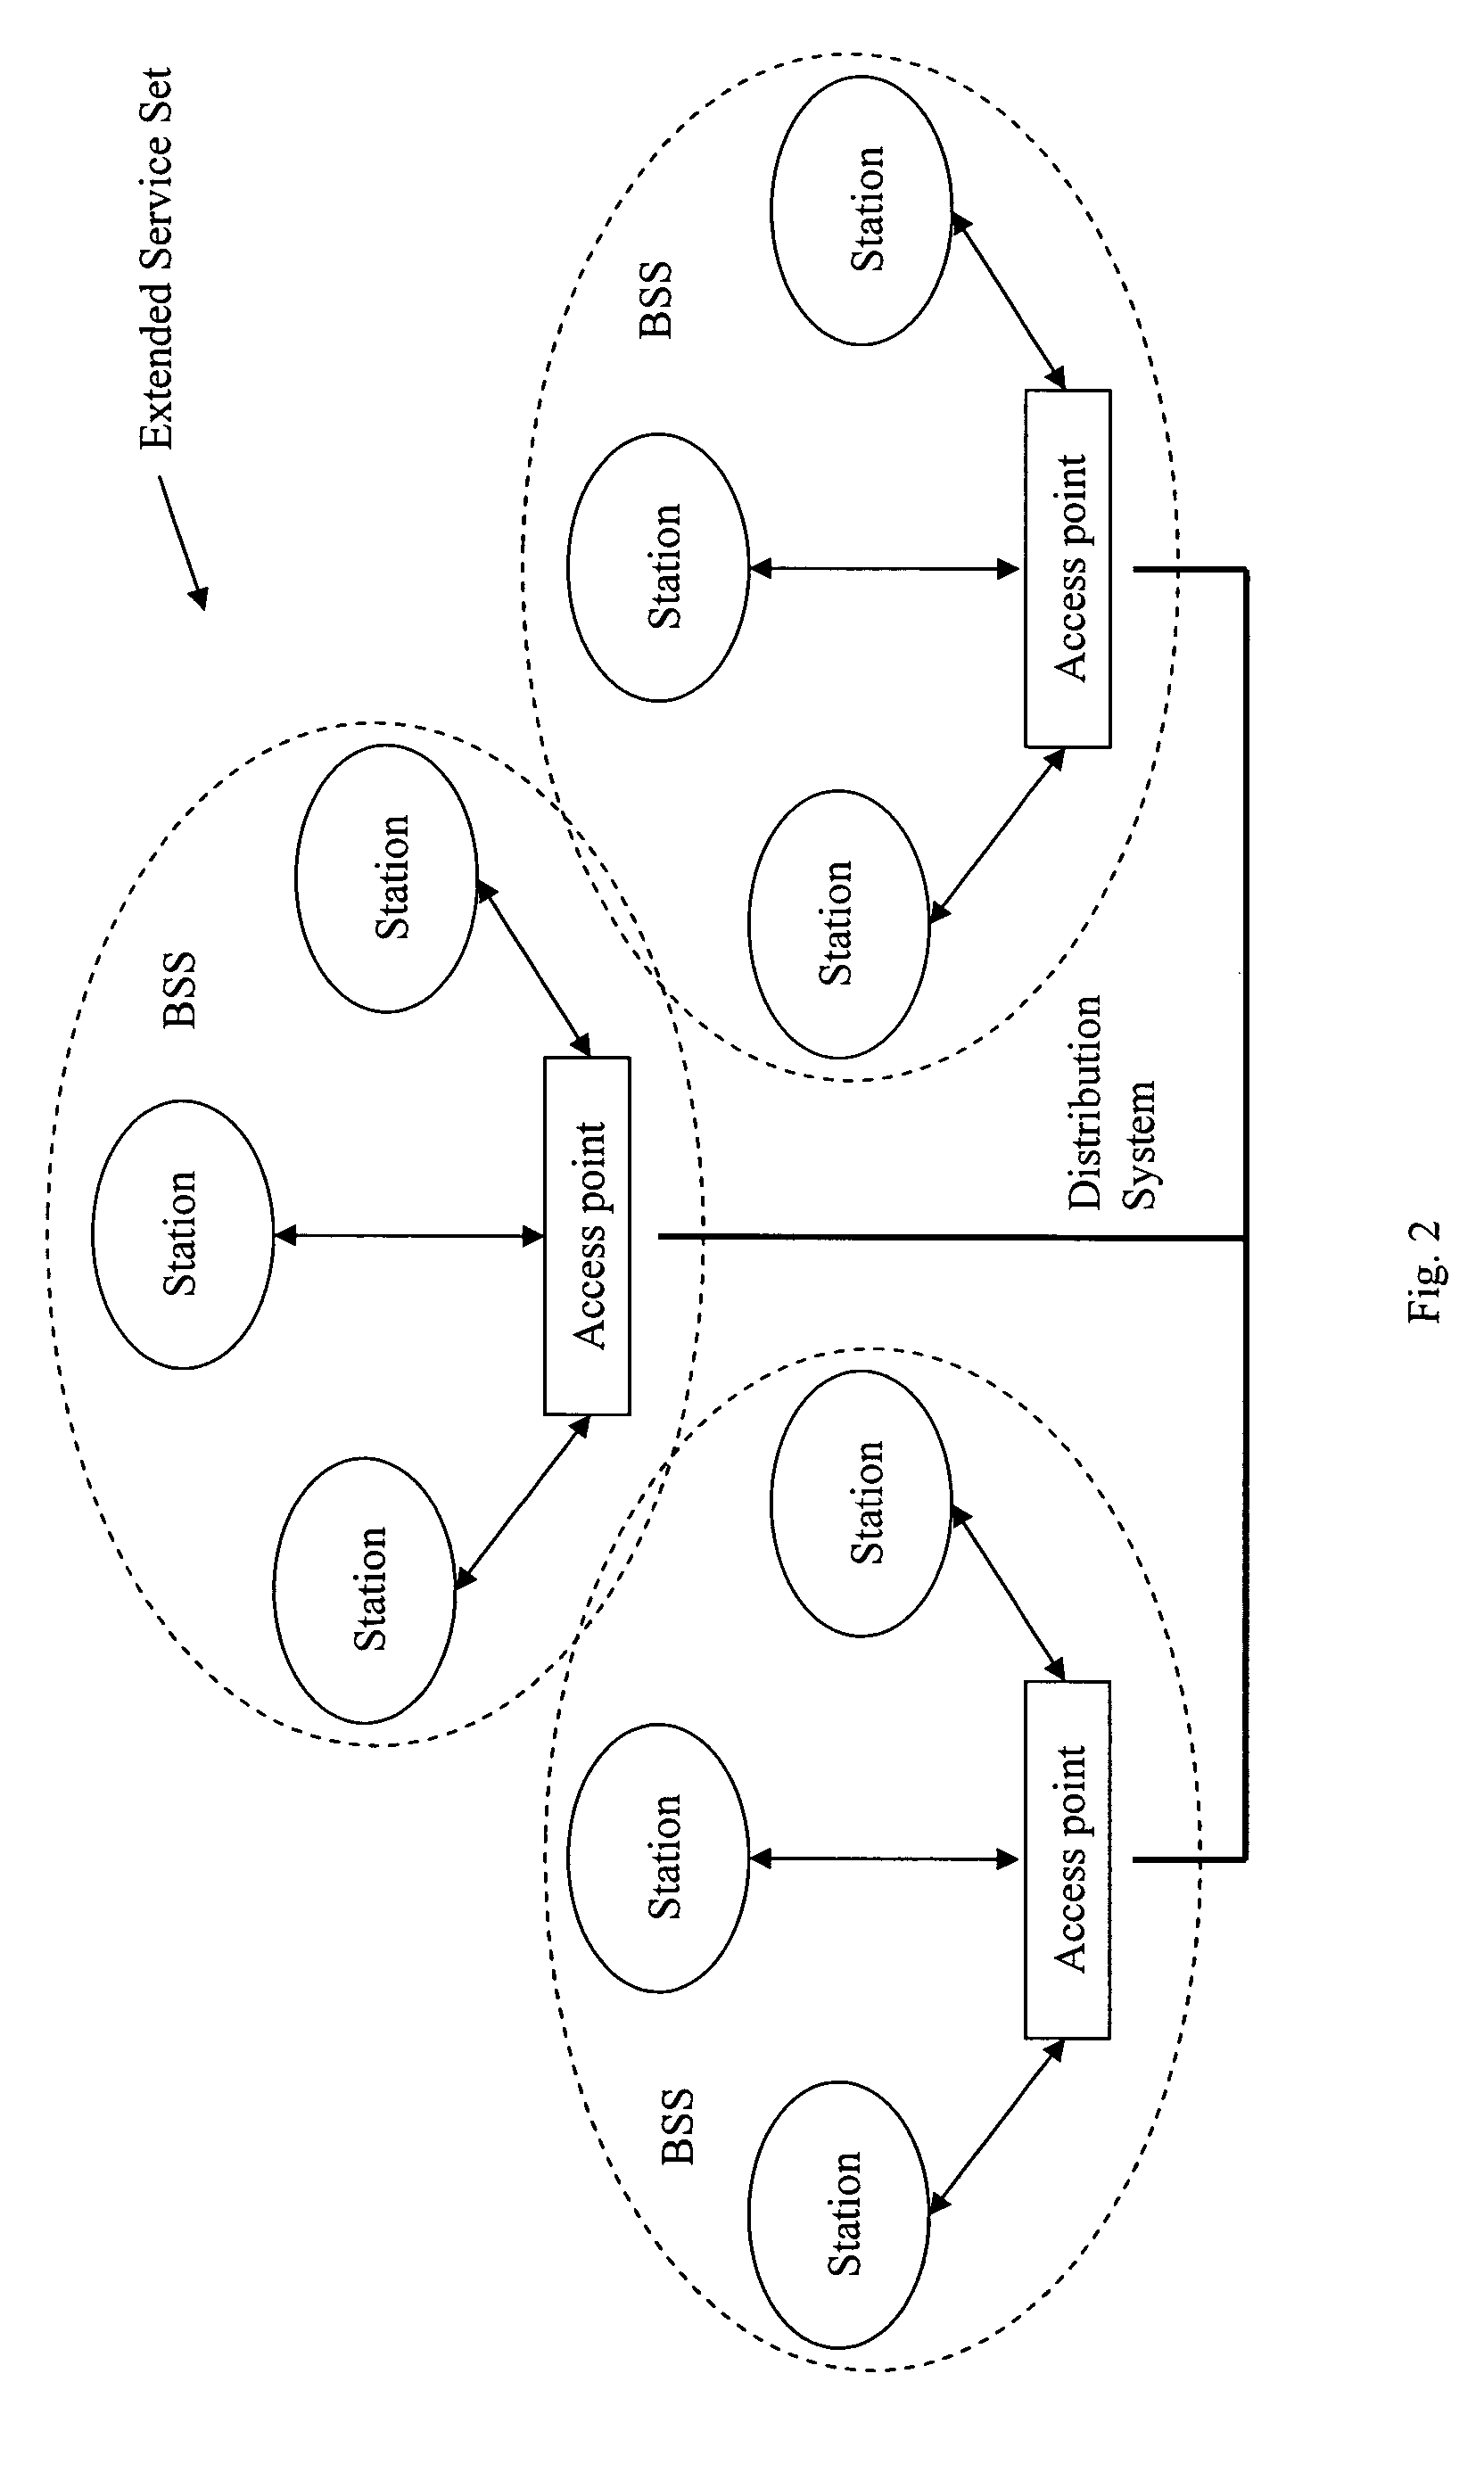 Determining the service set identification of an access point in a wireless local area network